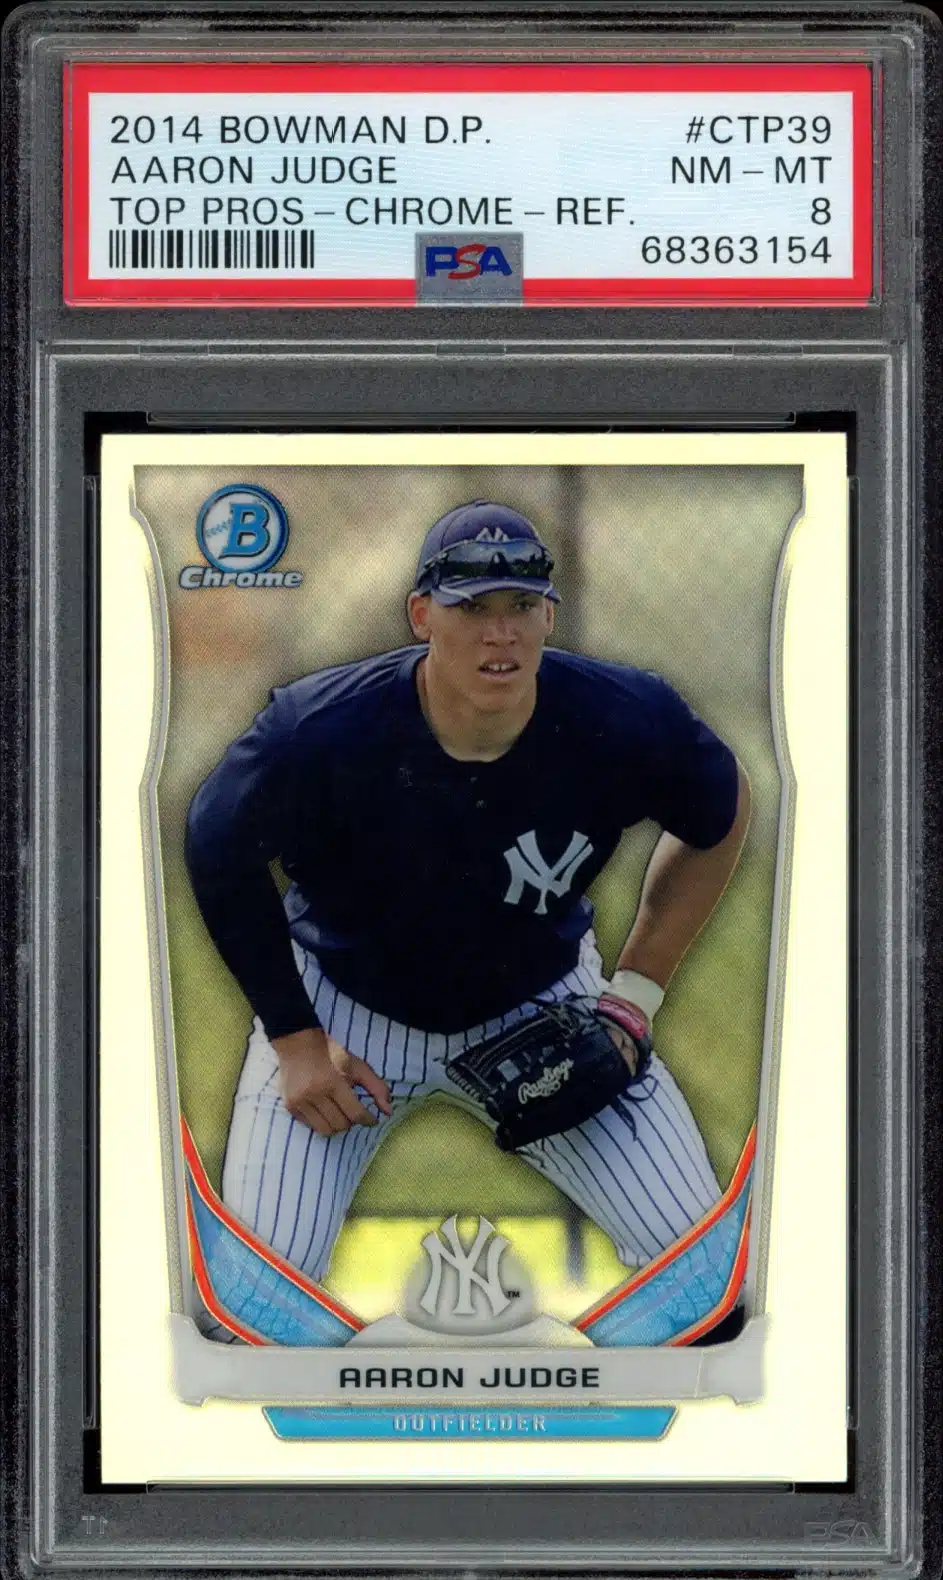 2014 Bowman Draft Picks & Top Prospects Aaron Judge Top Prospects Chrome Refractor #CTP-39 (PSA 8) (Front)